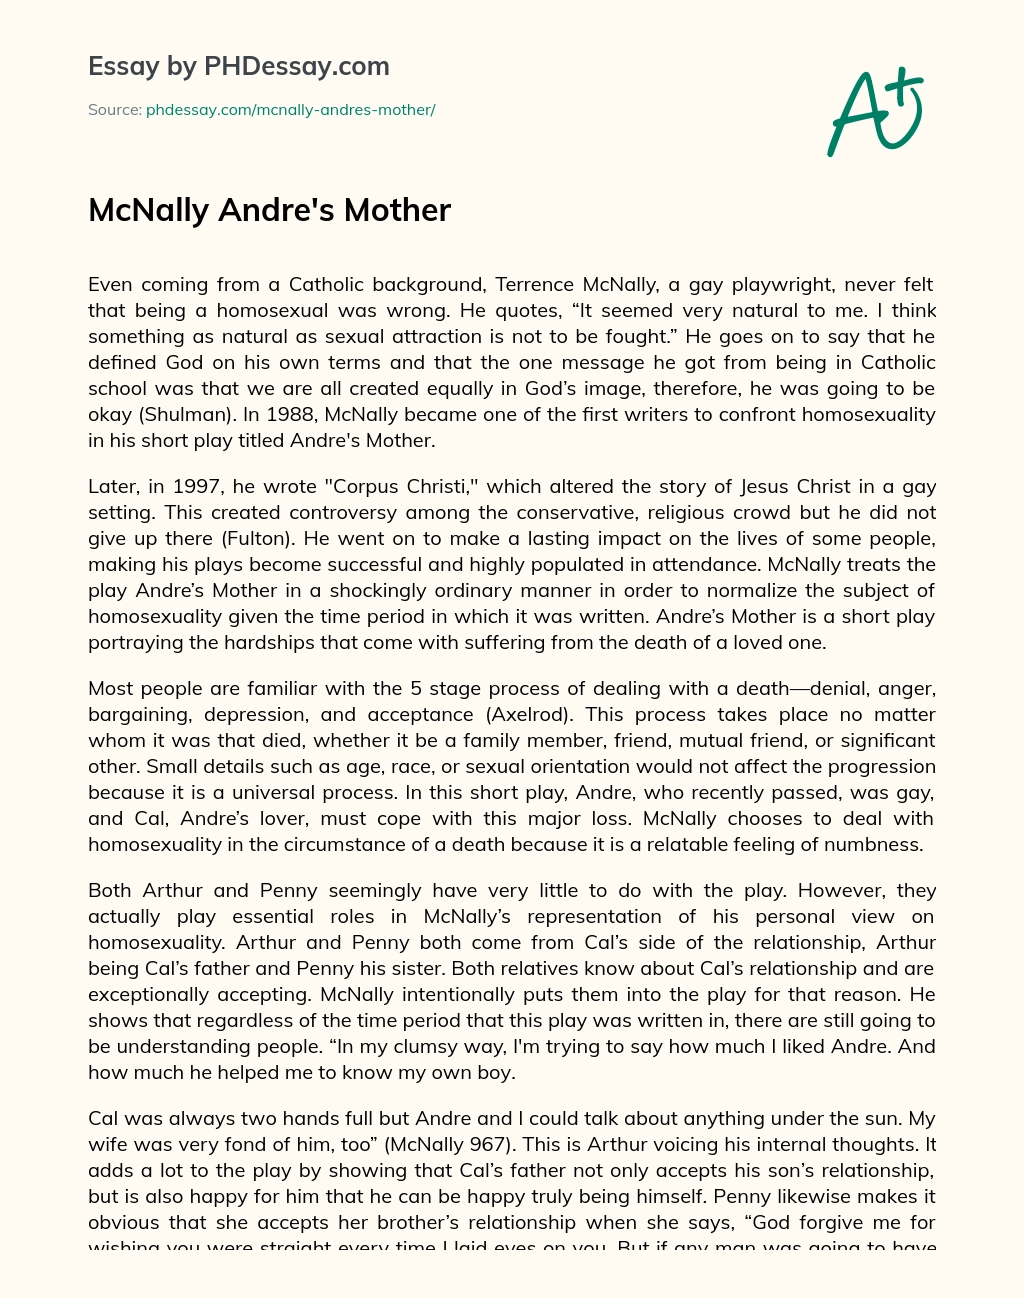 McNally Andre’s Mother essay